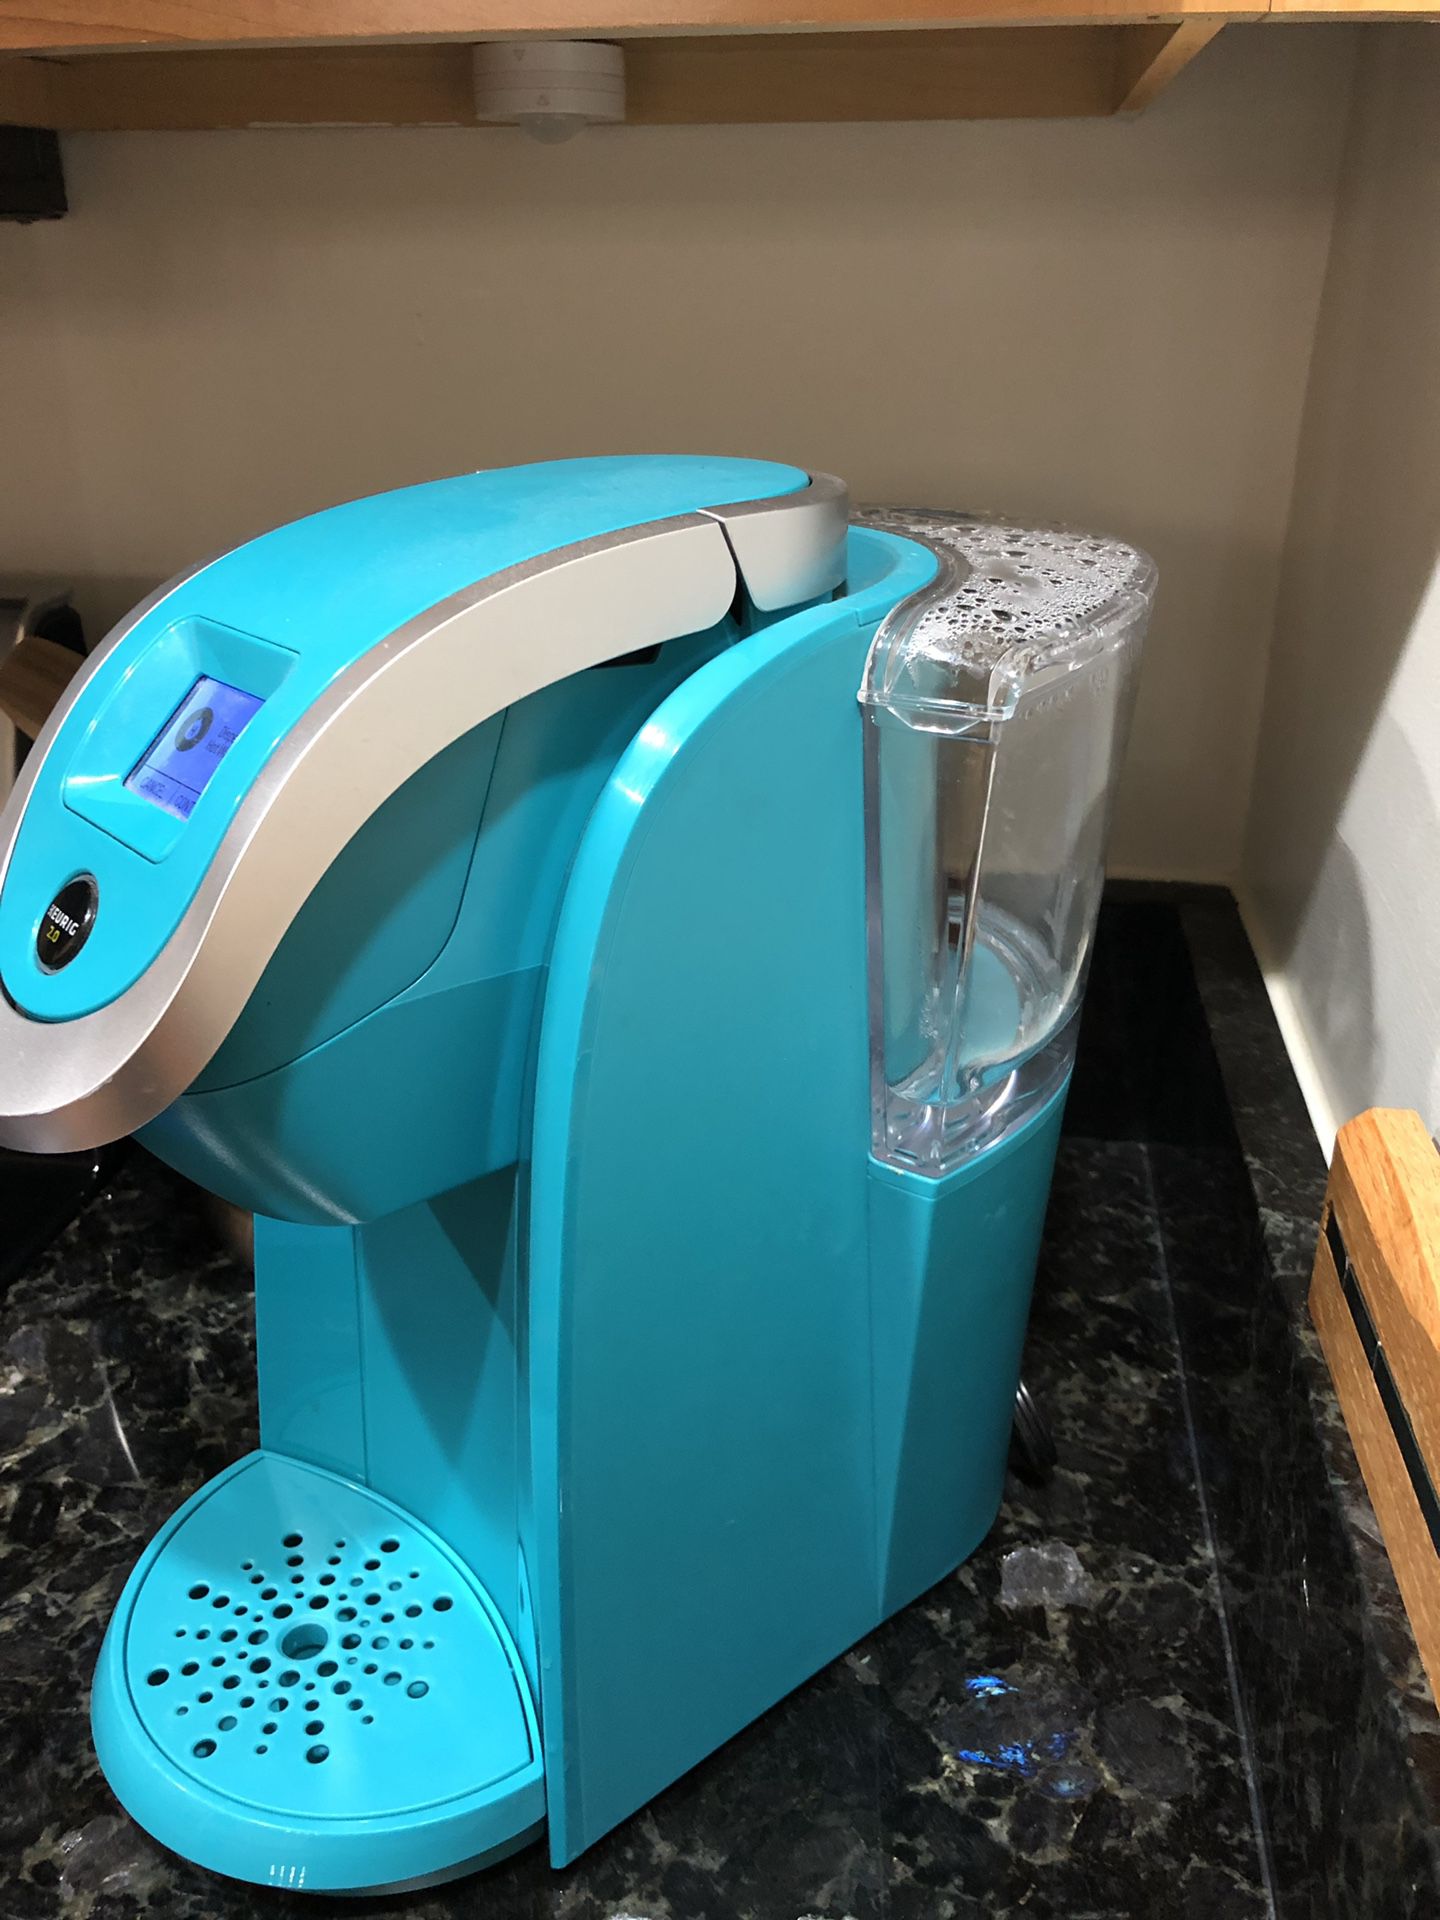 2.0 keurig in great condition